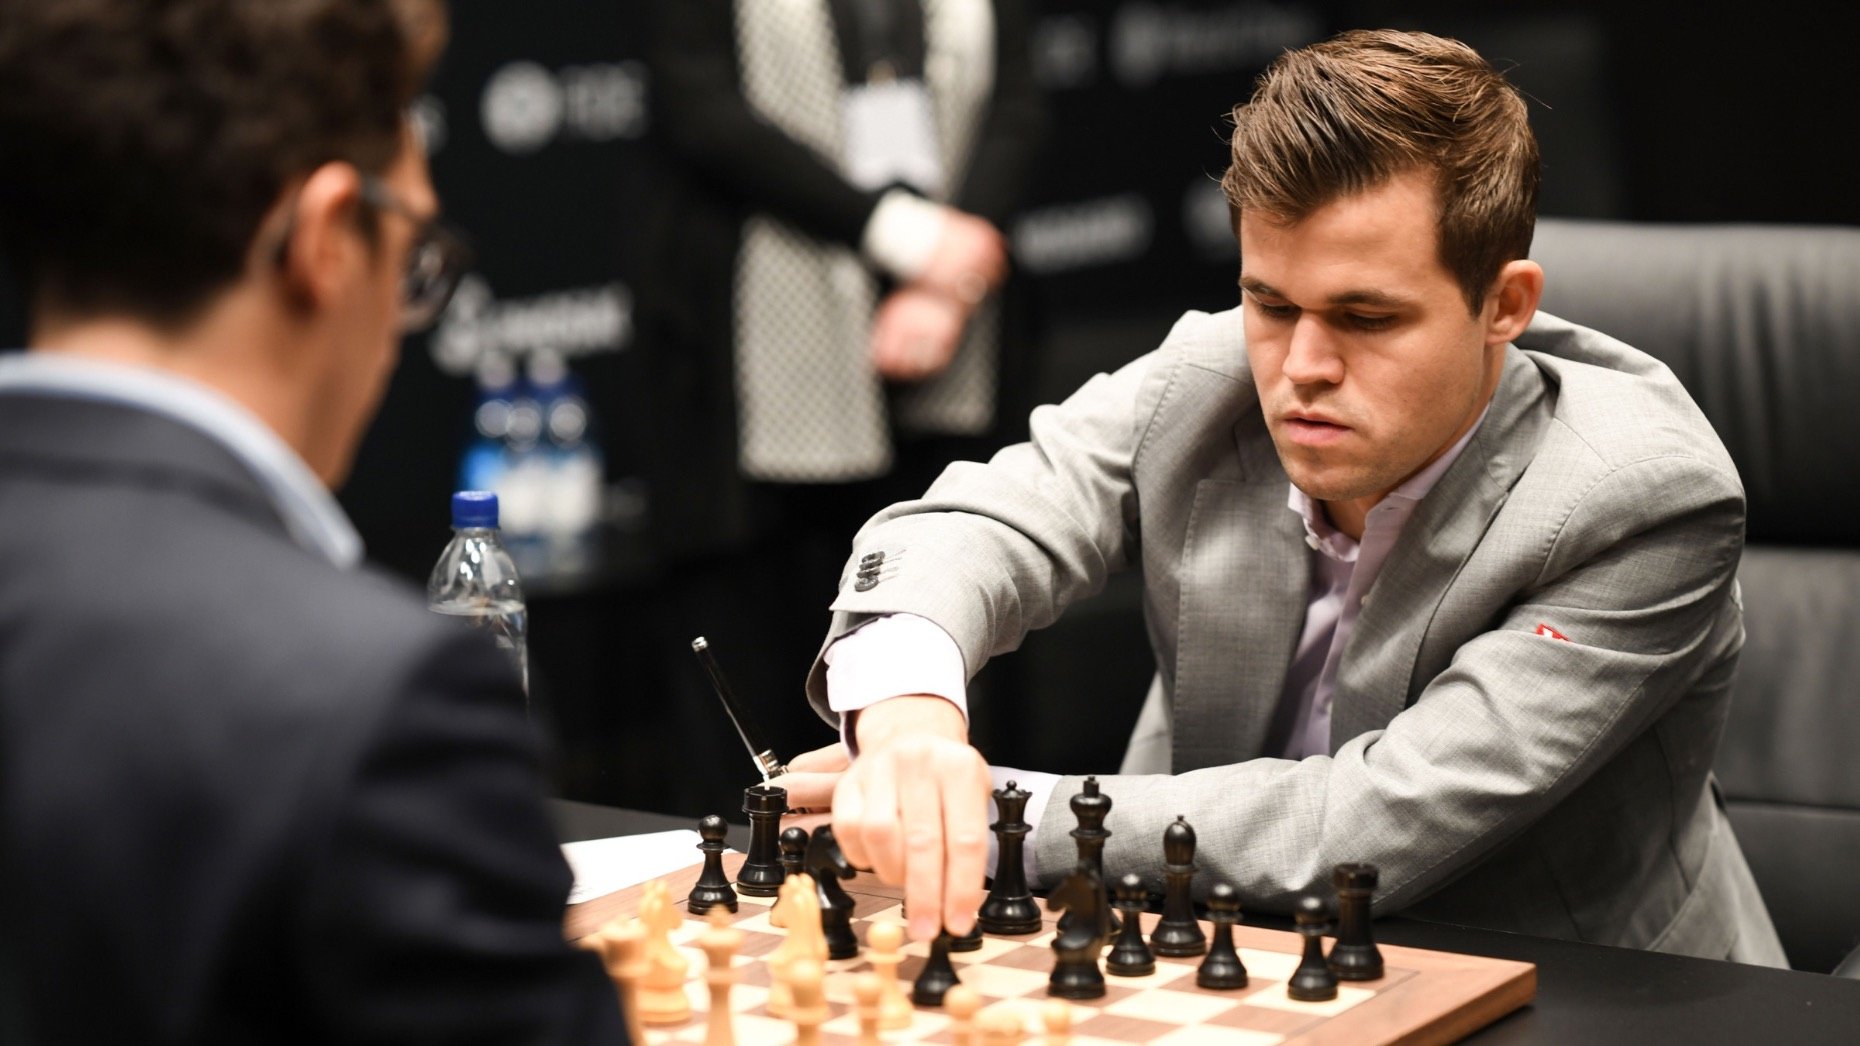 Magnus Carlsen competing in the World Chess Championship in 2018. Photo: B. Lenoir / Shutterstock.com.